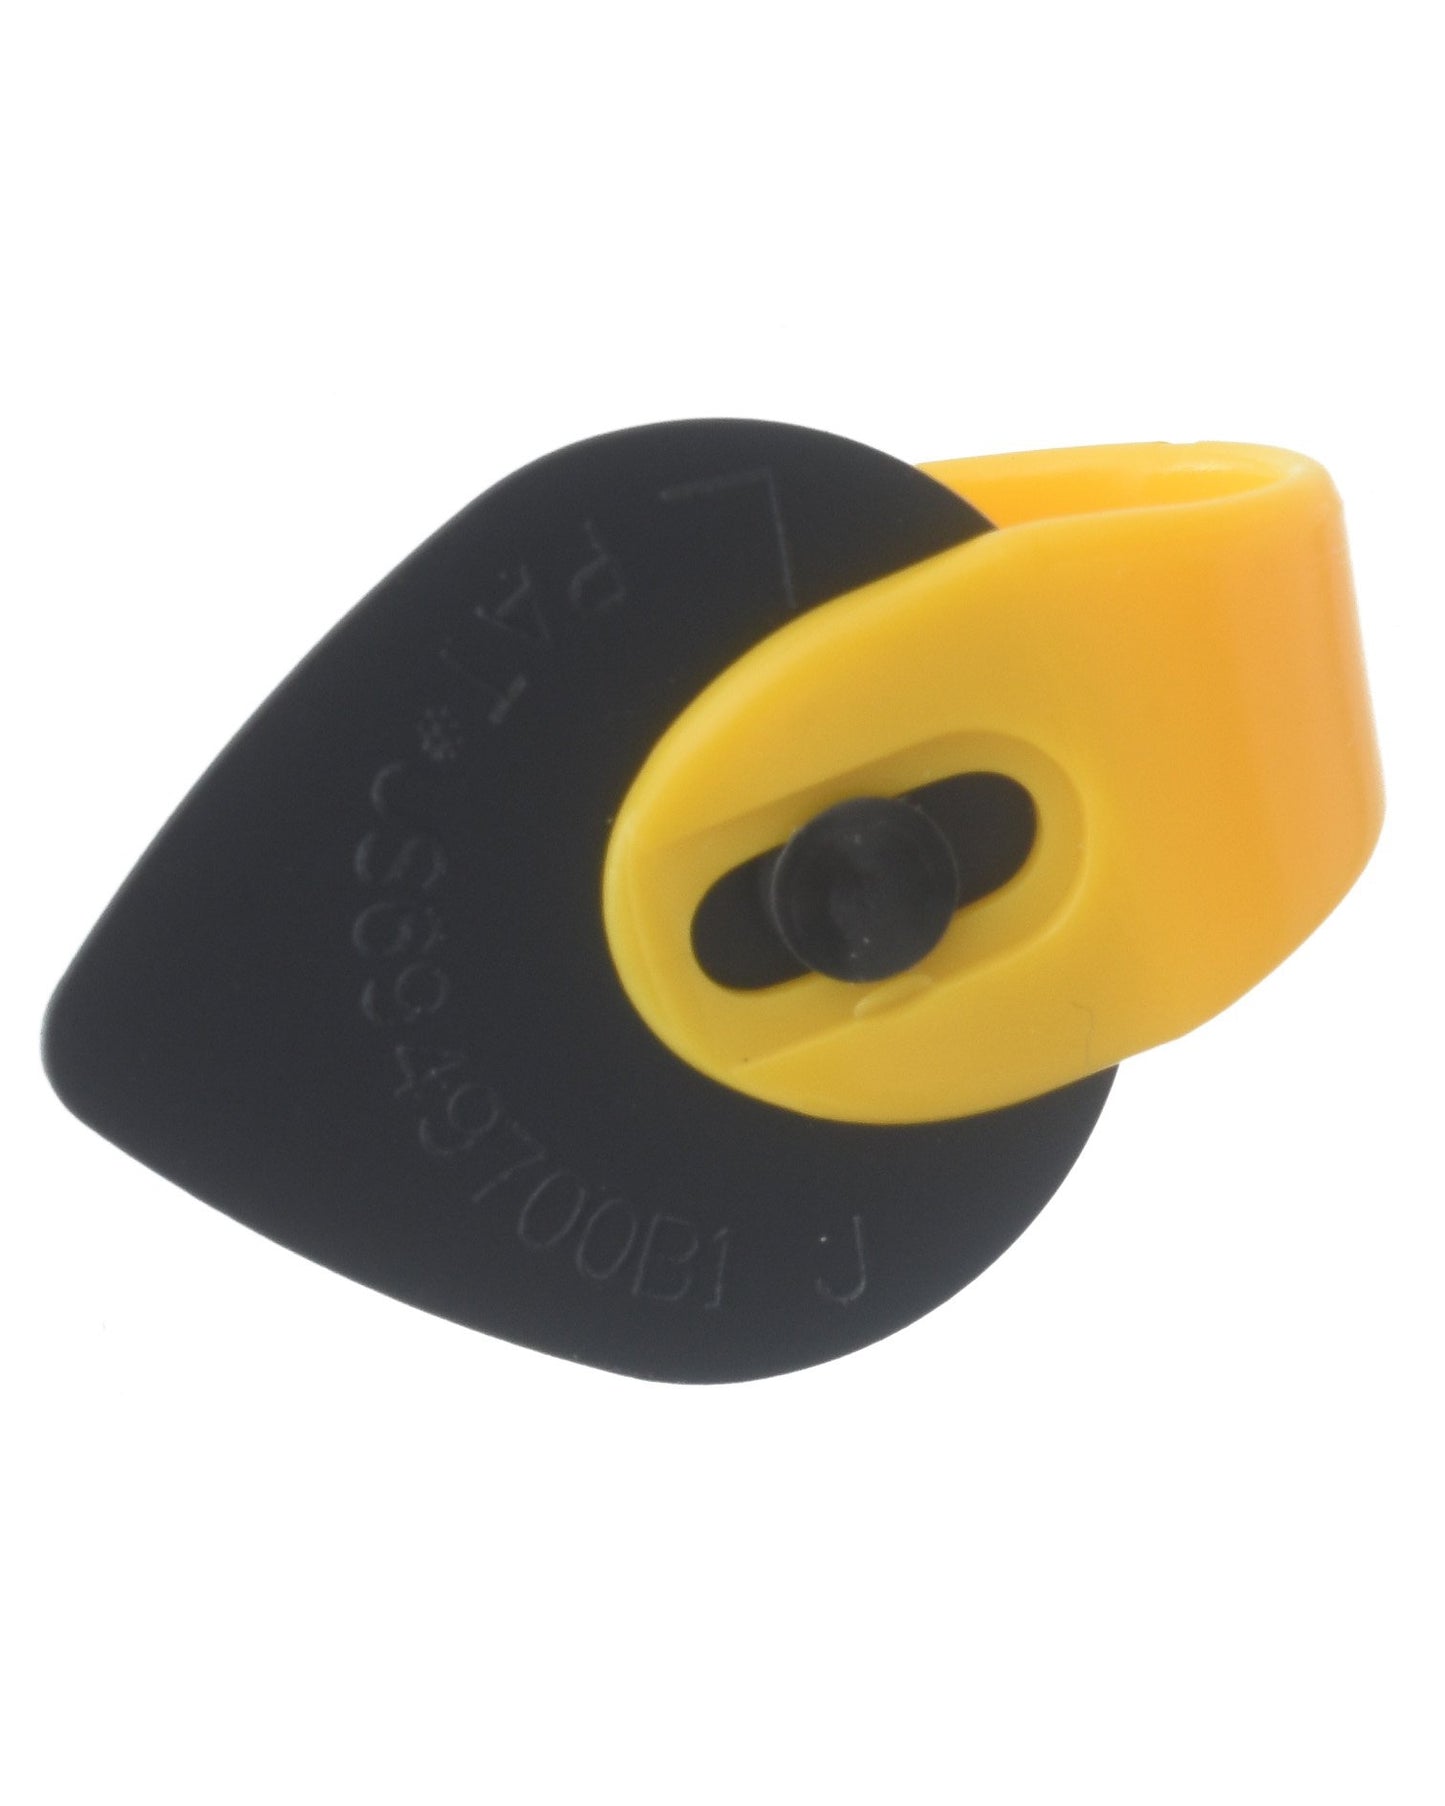 Image 1 of Fred Kelly Delrin Light Gauge Bumble Bee Jazz Pick - SKU# PKBBJ-L : Product Type Accessories & Parts : Elderly Instruments